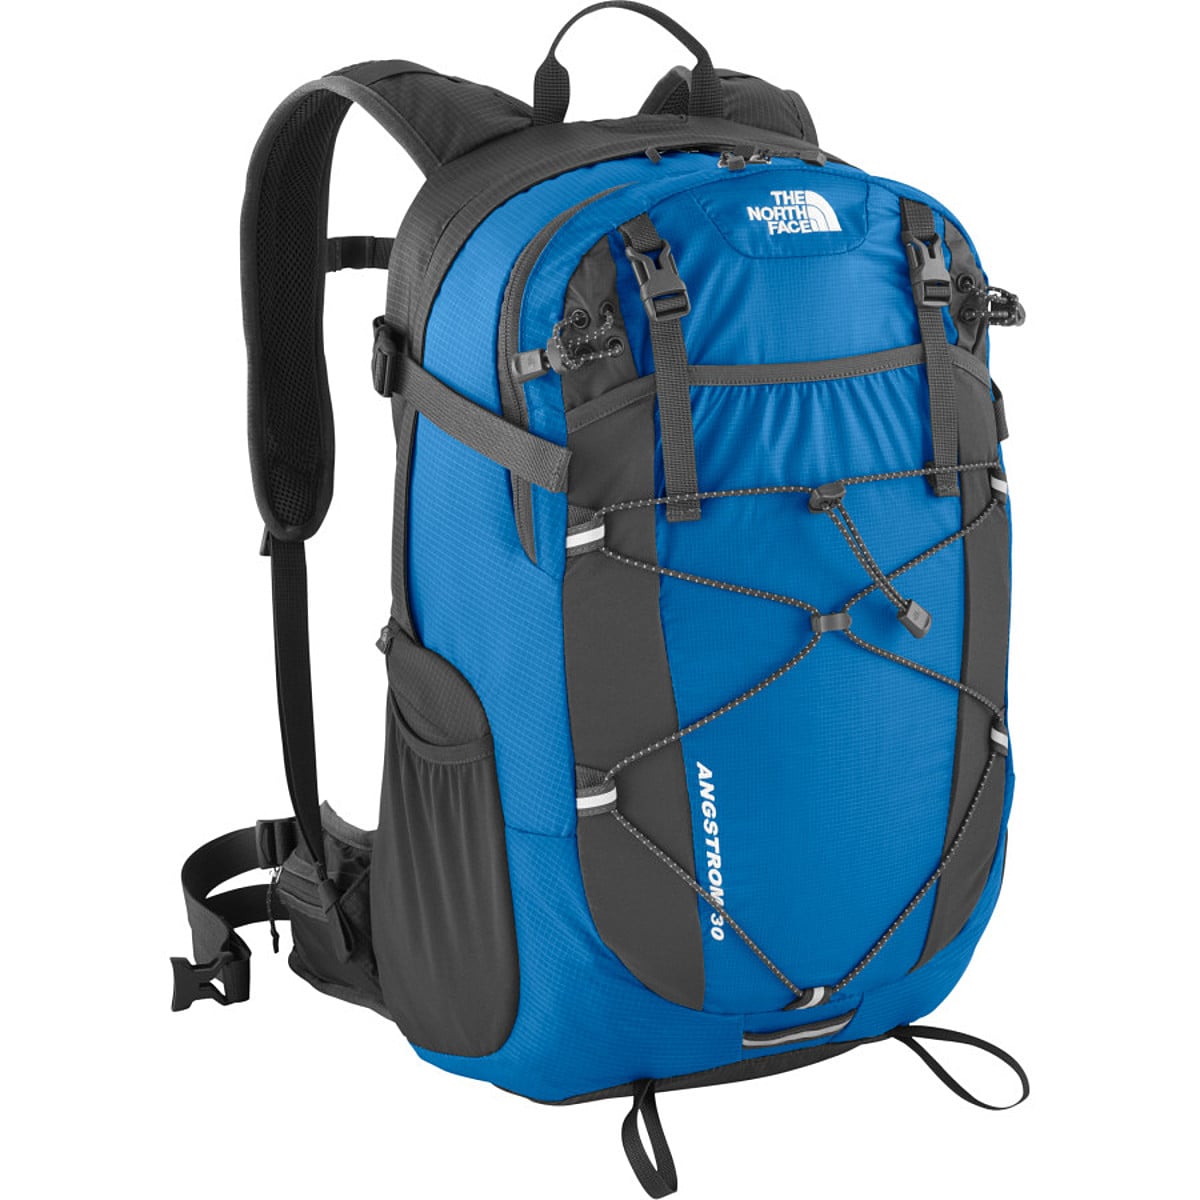 The North Face Angstrom 30 Backpack - 2014cu in - Hike & Camp